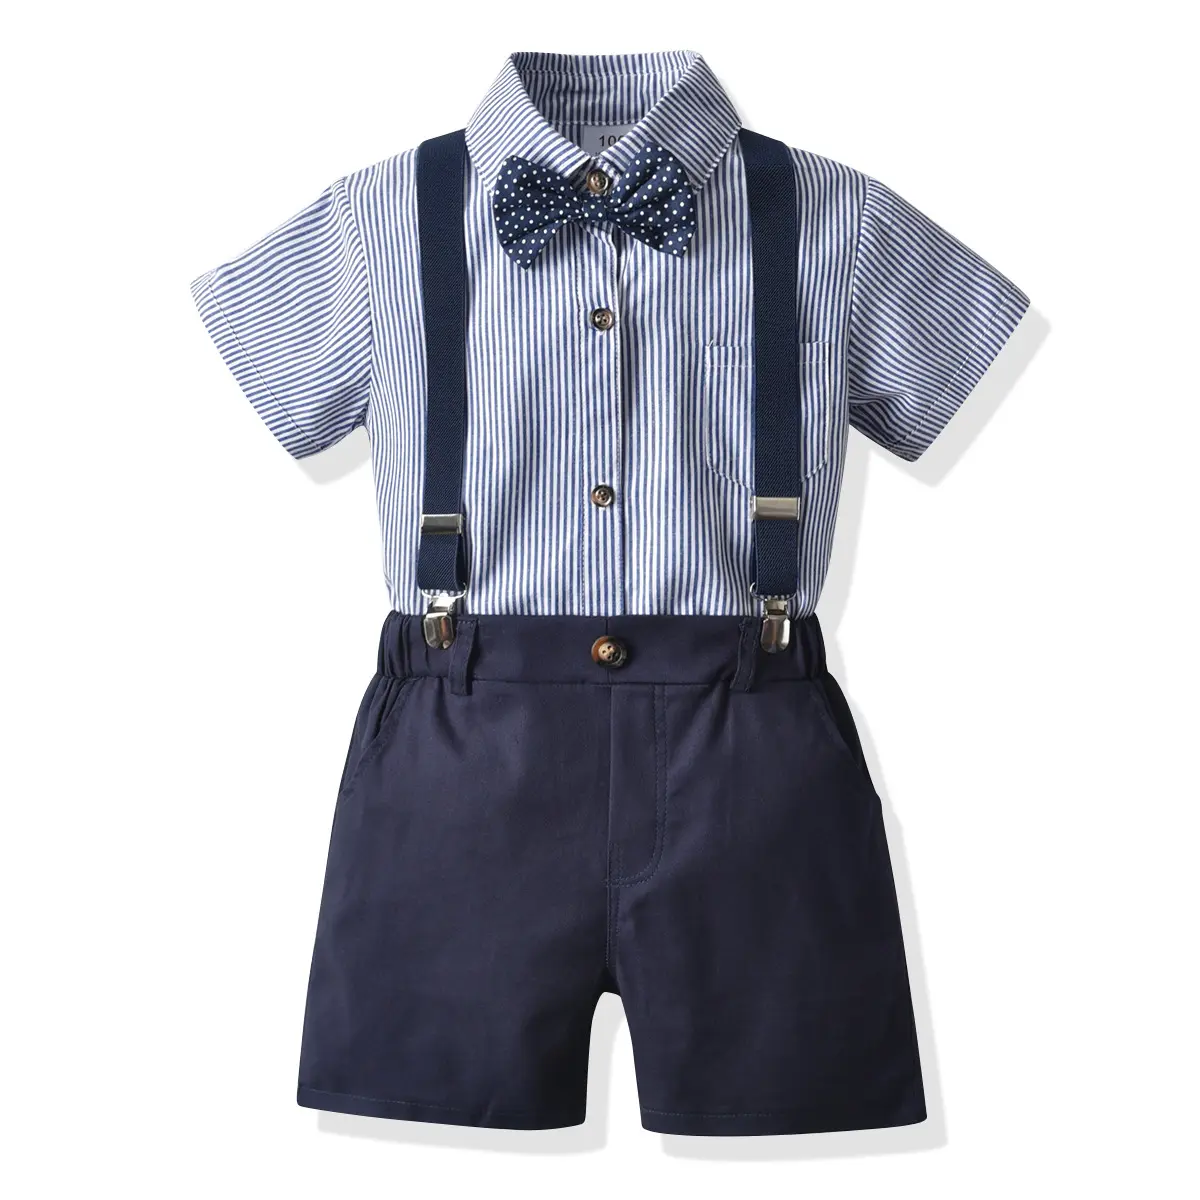 Summer baby clothing short sleeve cycling oversized boy baby t shirt set with short pants